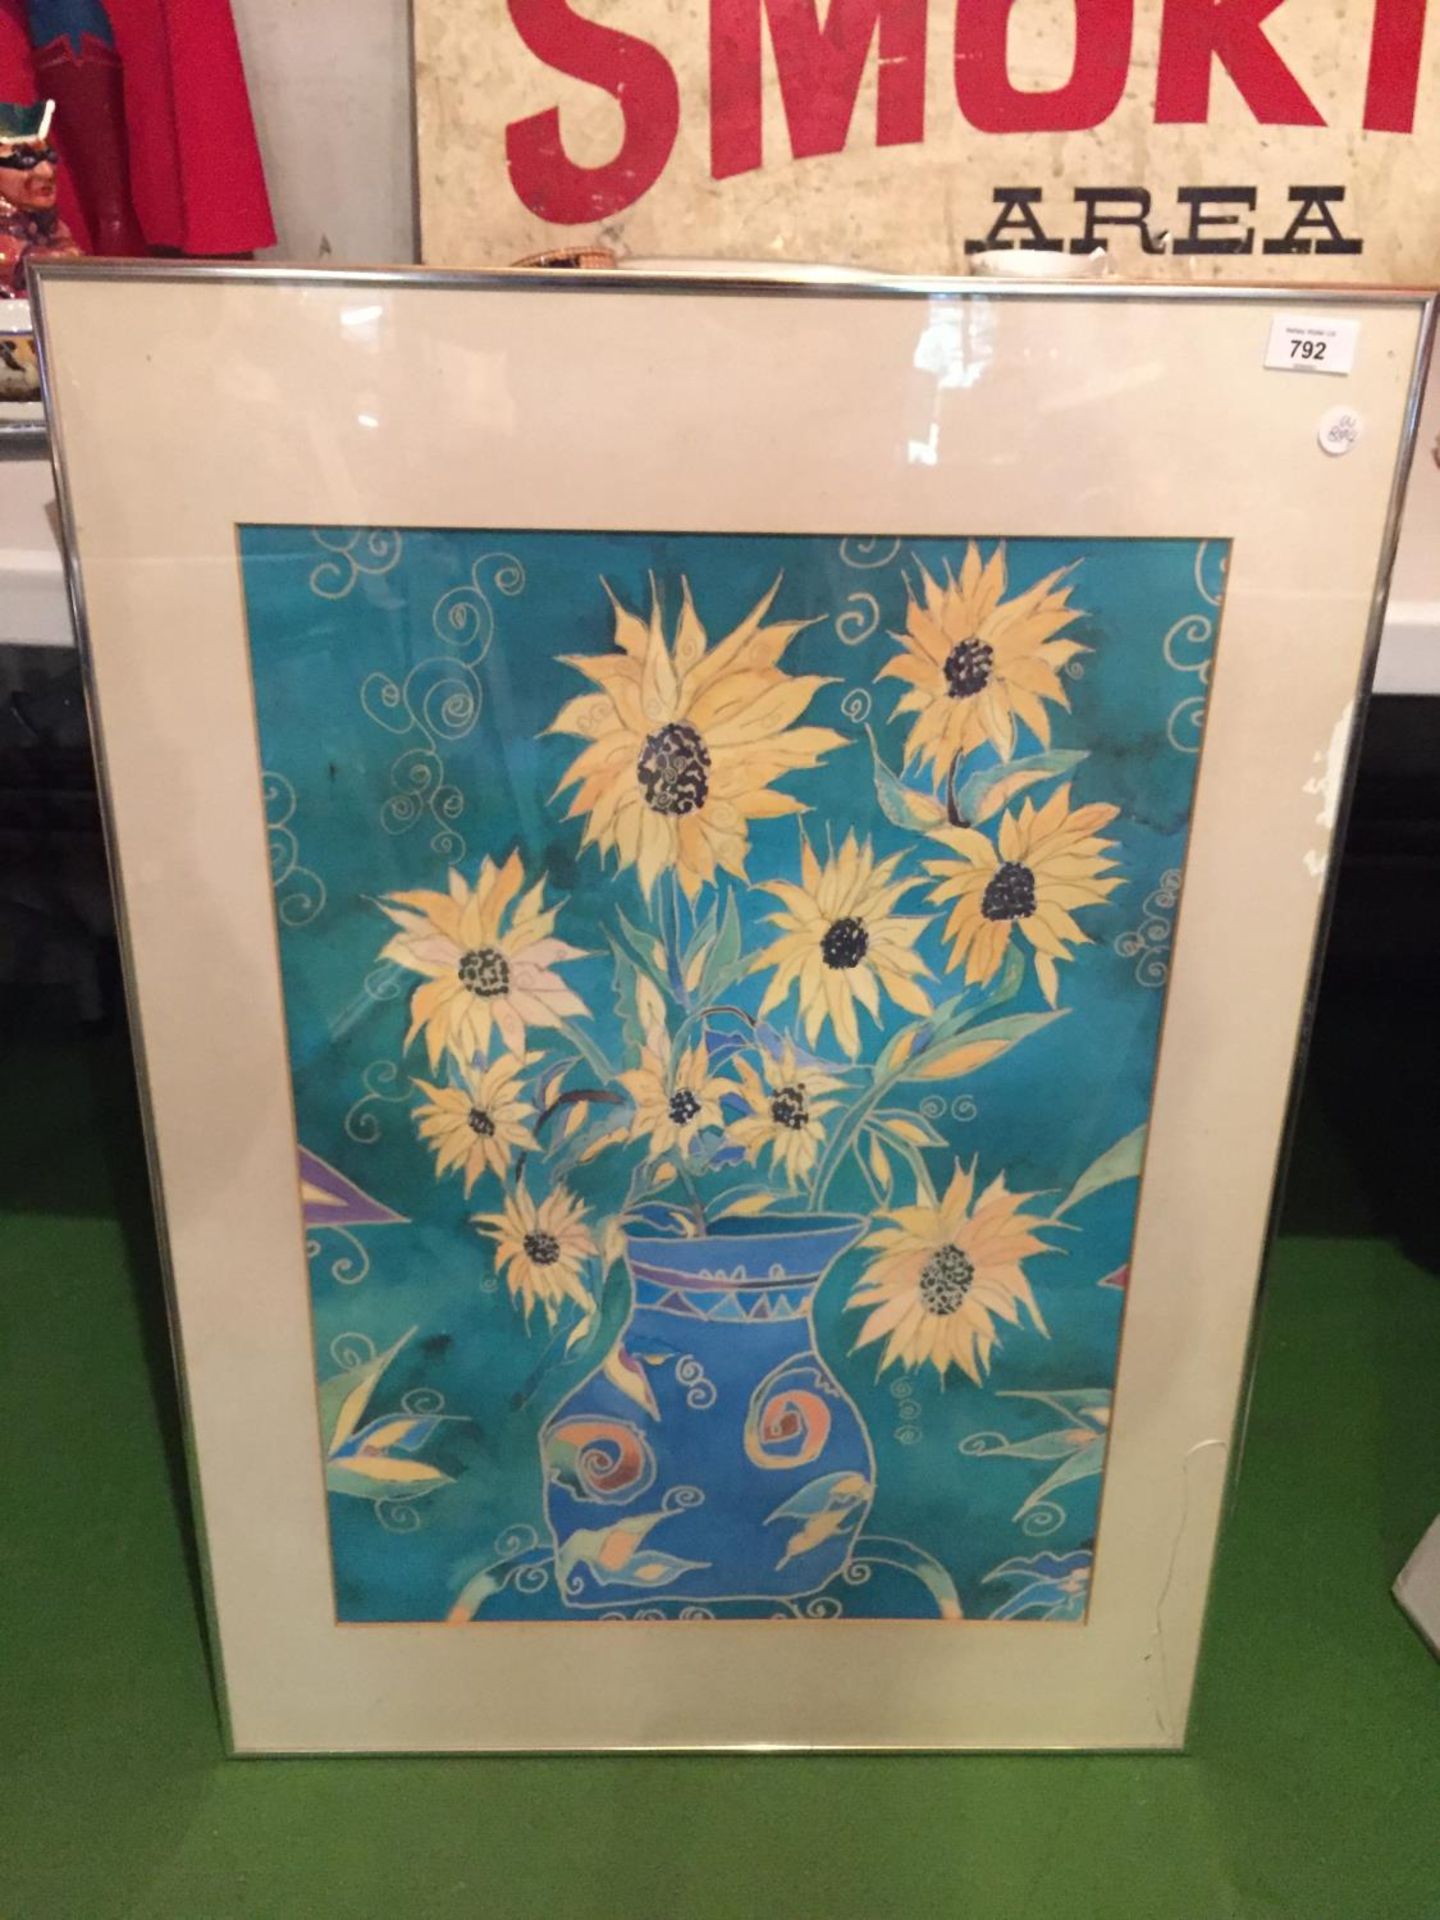 A LARGE FRAMED PRINT OF SUNFLOWERS IN A VASE